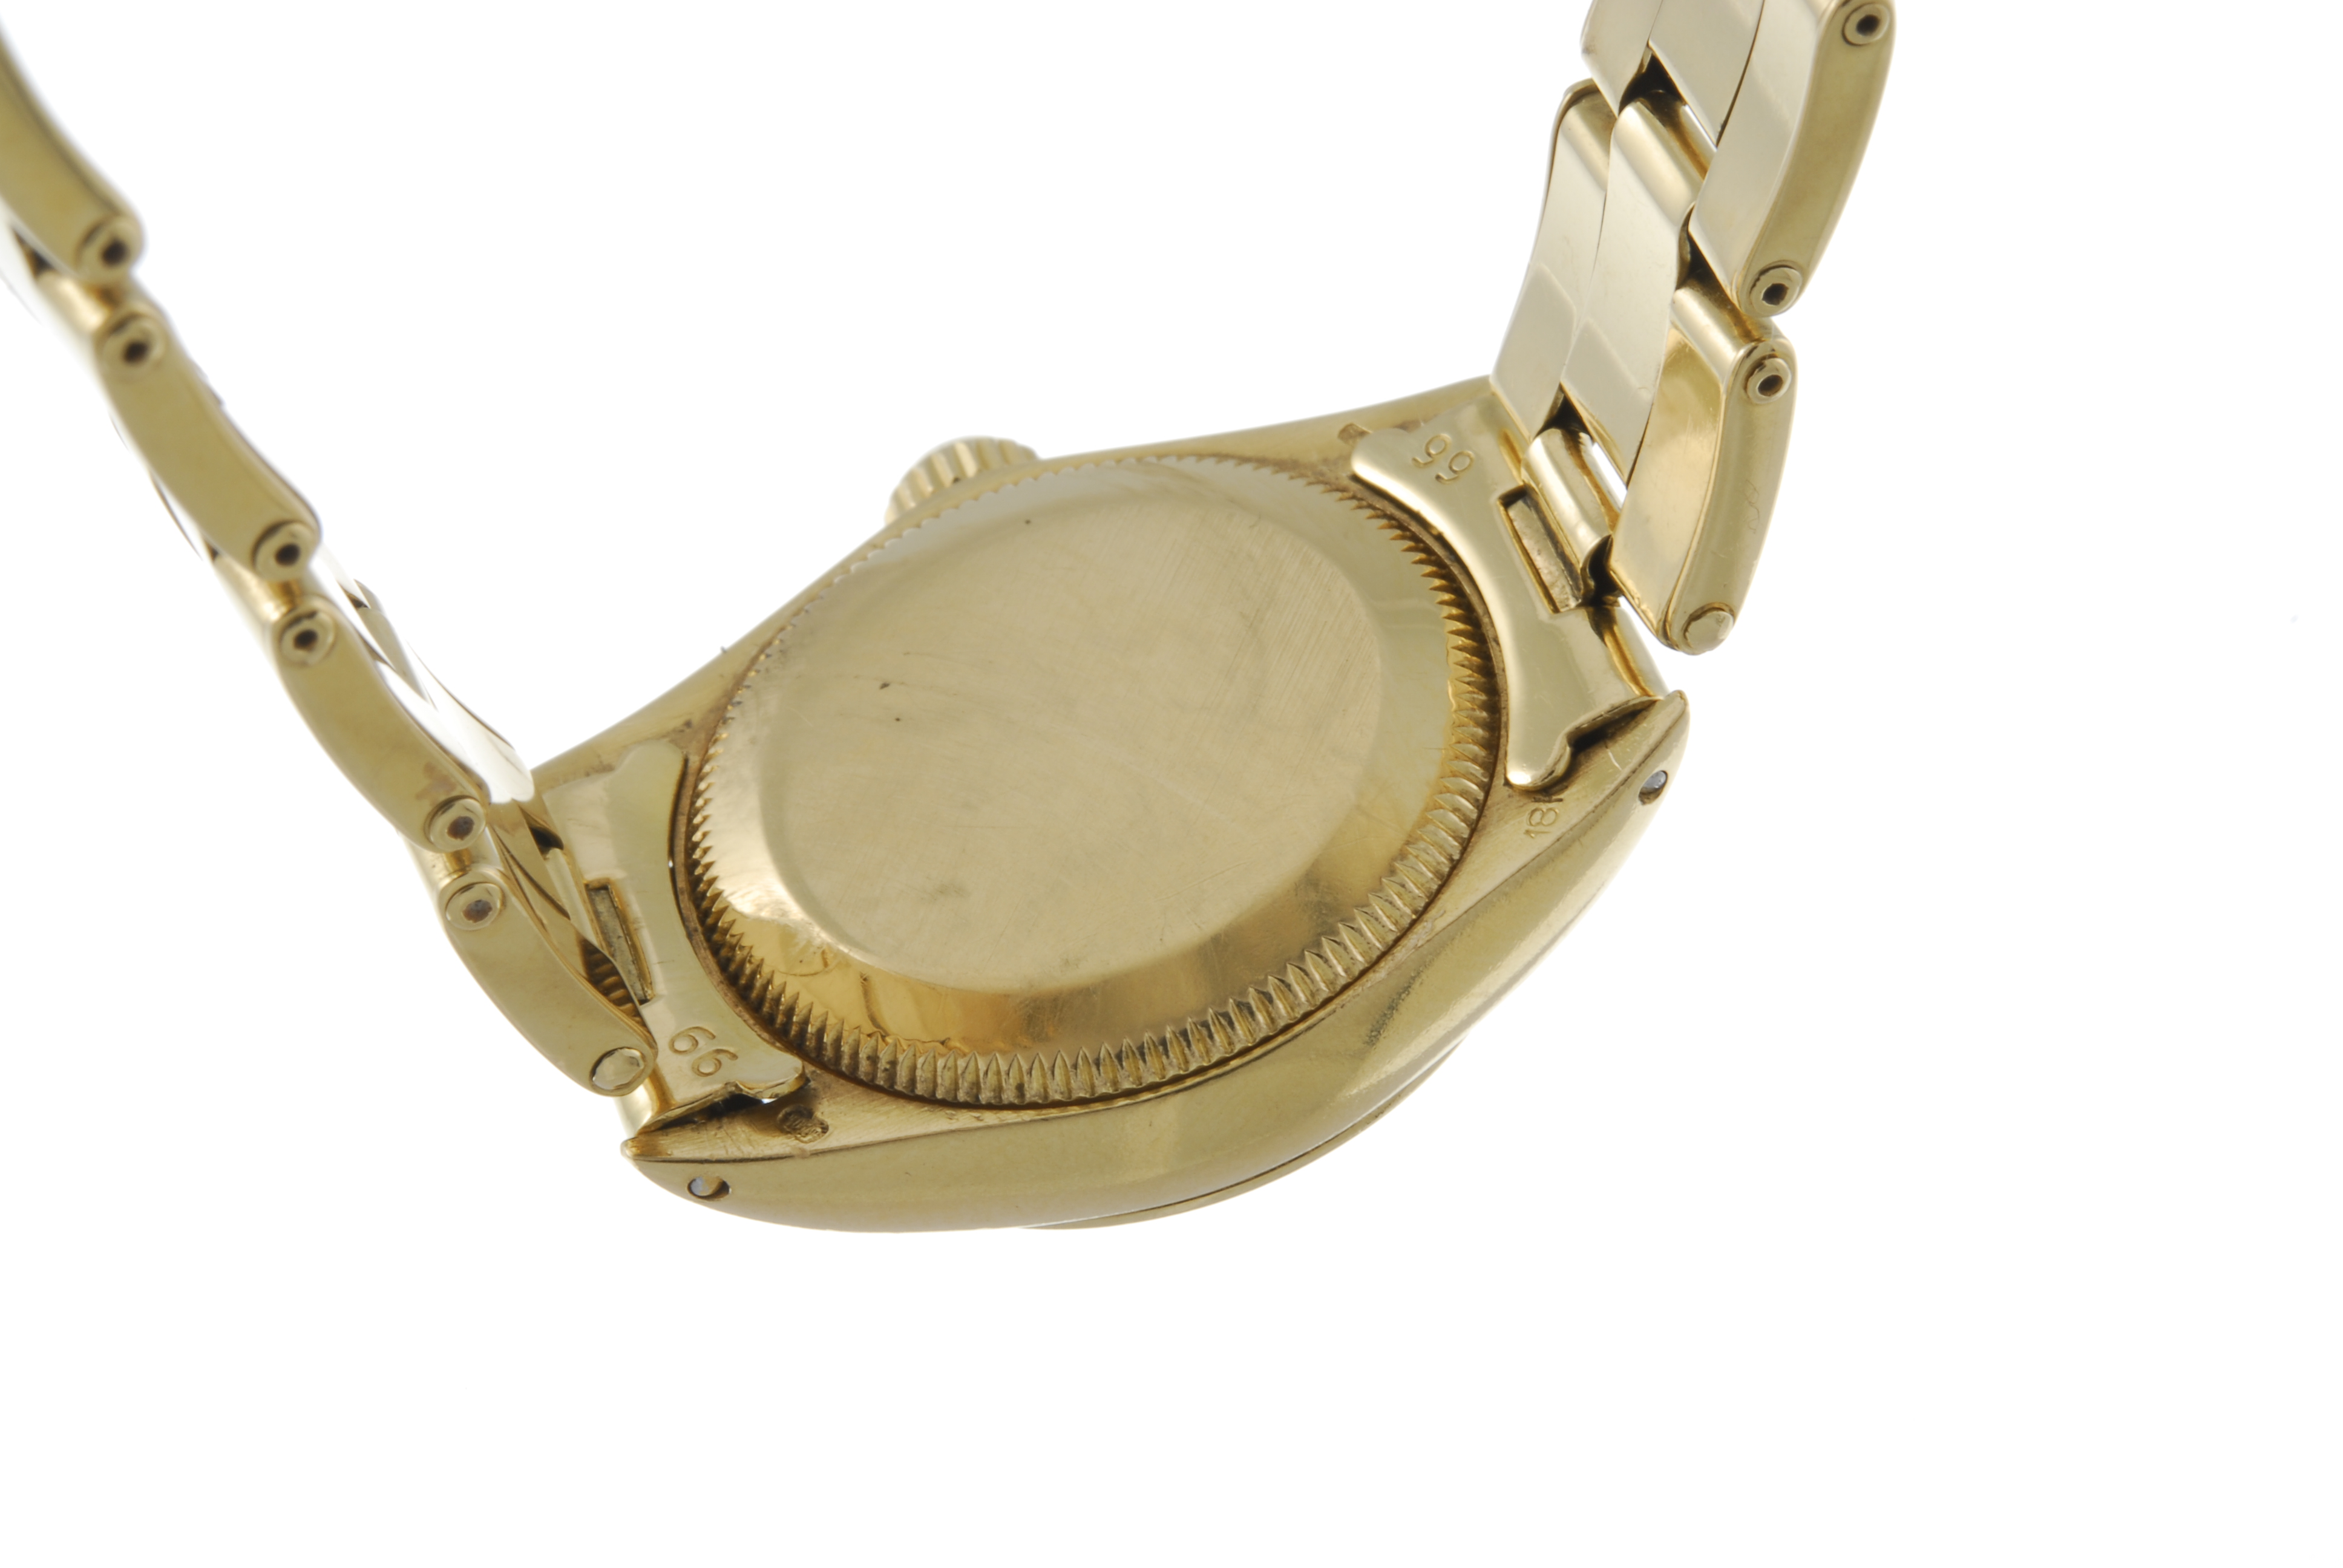 ROLEX - a lady's Oyster Perpetual bracelet watch. Circa 1977. 18ct yellow gold case. Reference 6718, - Image 2 of 4